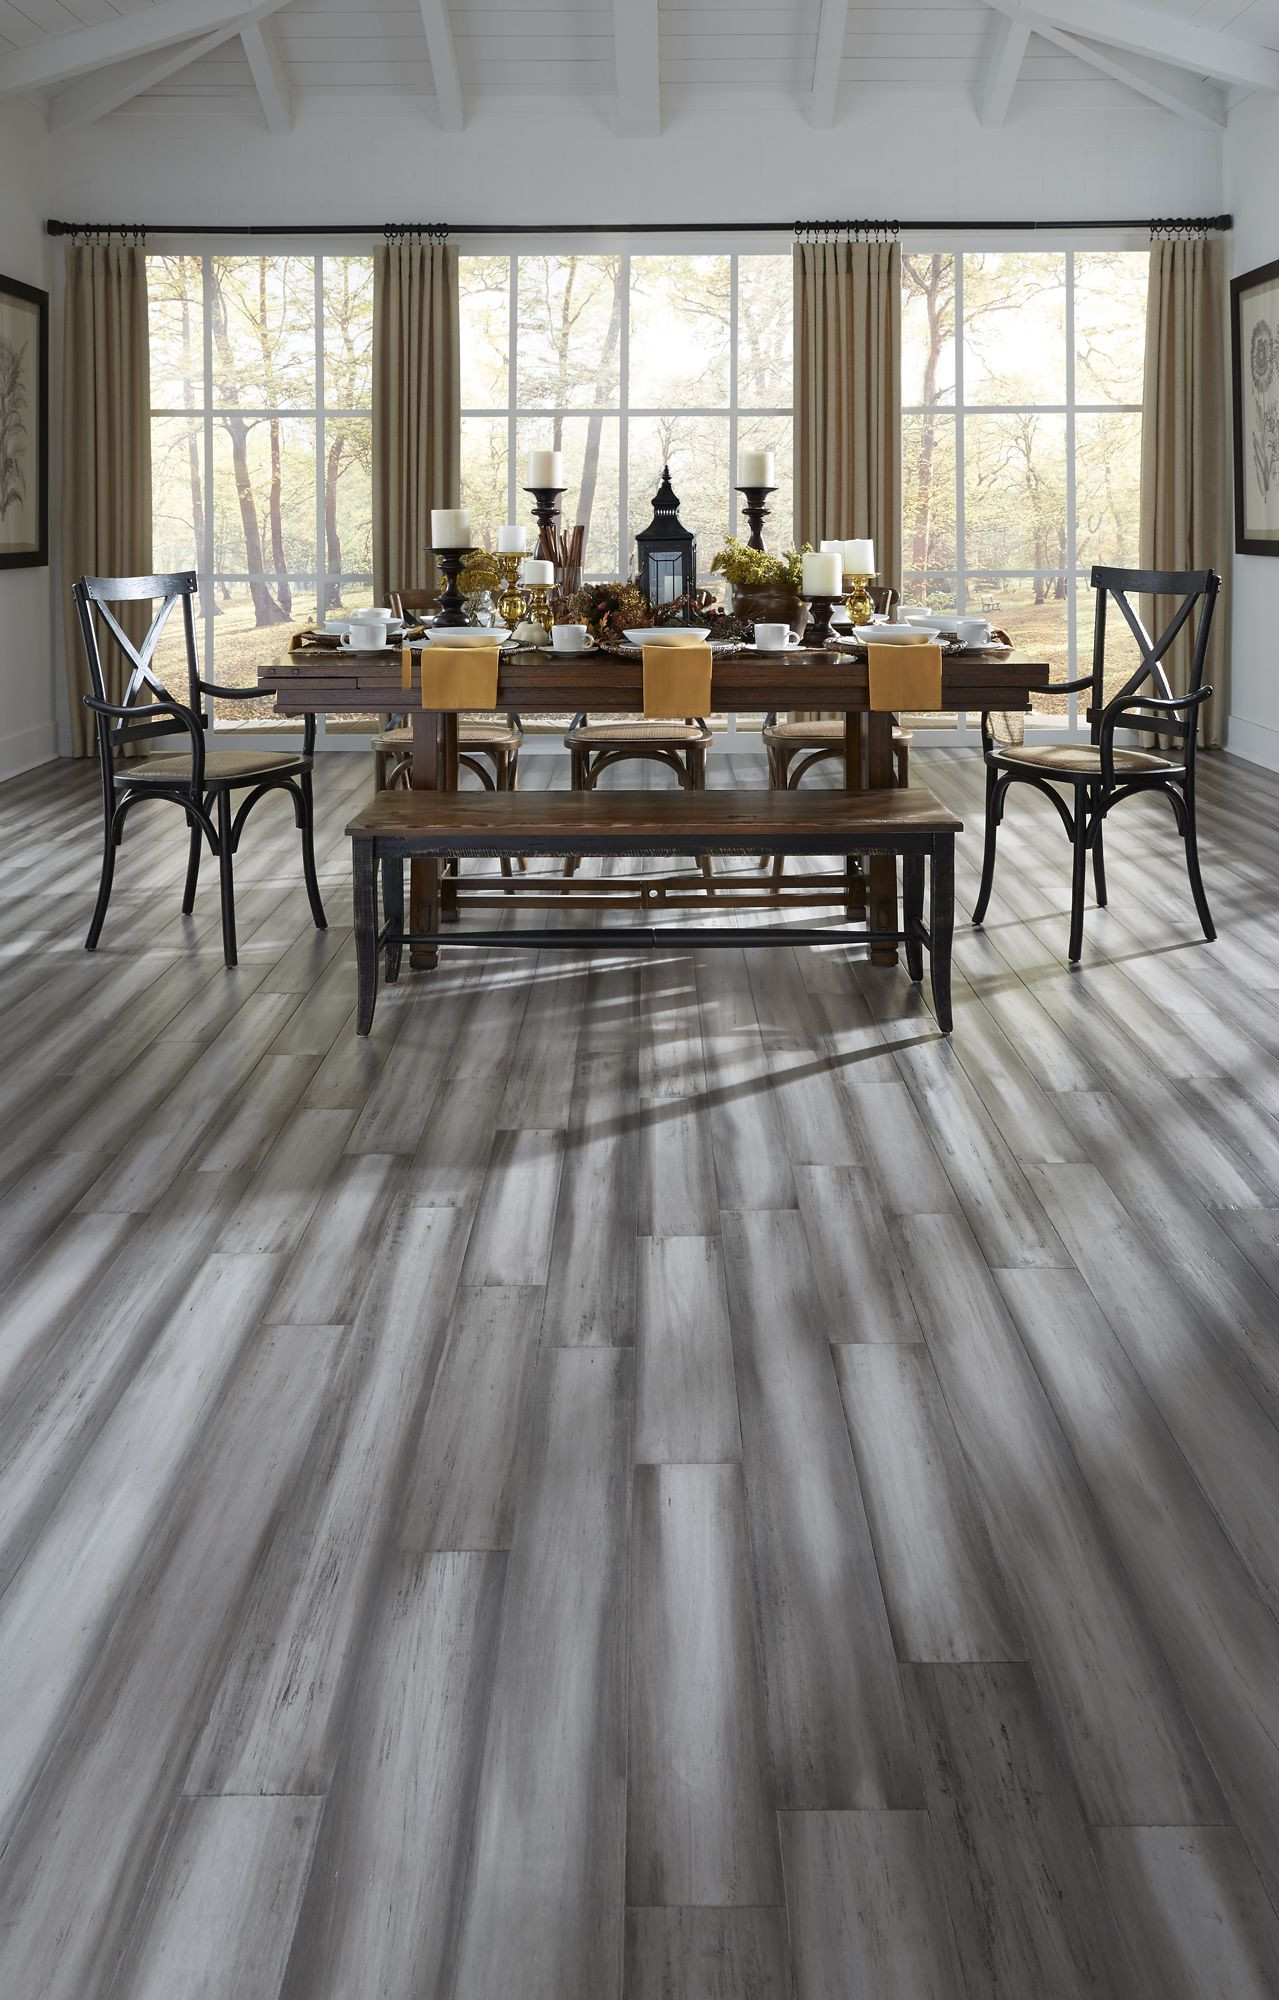 16 Fabulous Bamboo Hardwood Flooring Durability 2023 free download bamboo hardwood flooring durability of modern design and rustic texture pair perfectly with the stately throughout pair perfectly with the stately blend of light and dark gray shades to offe